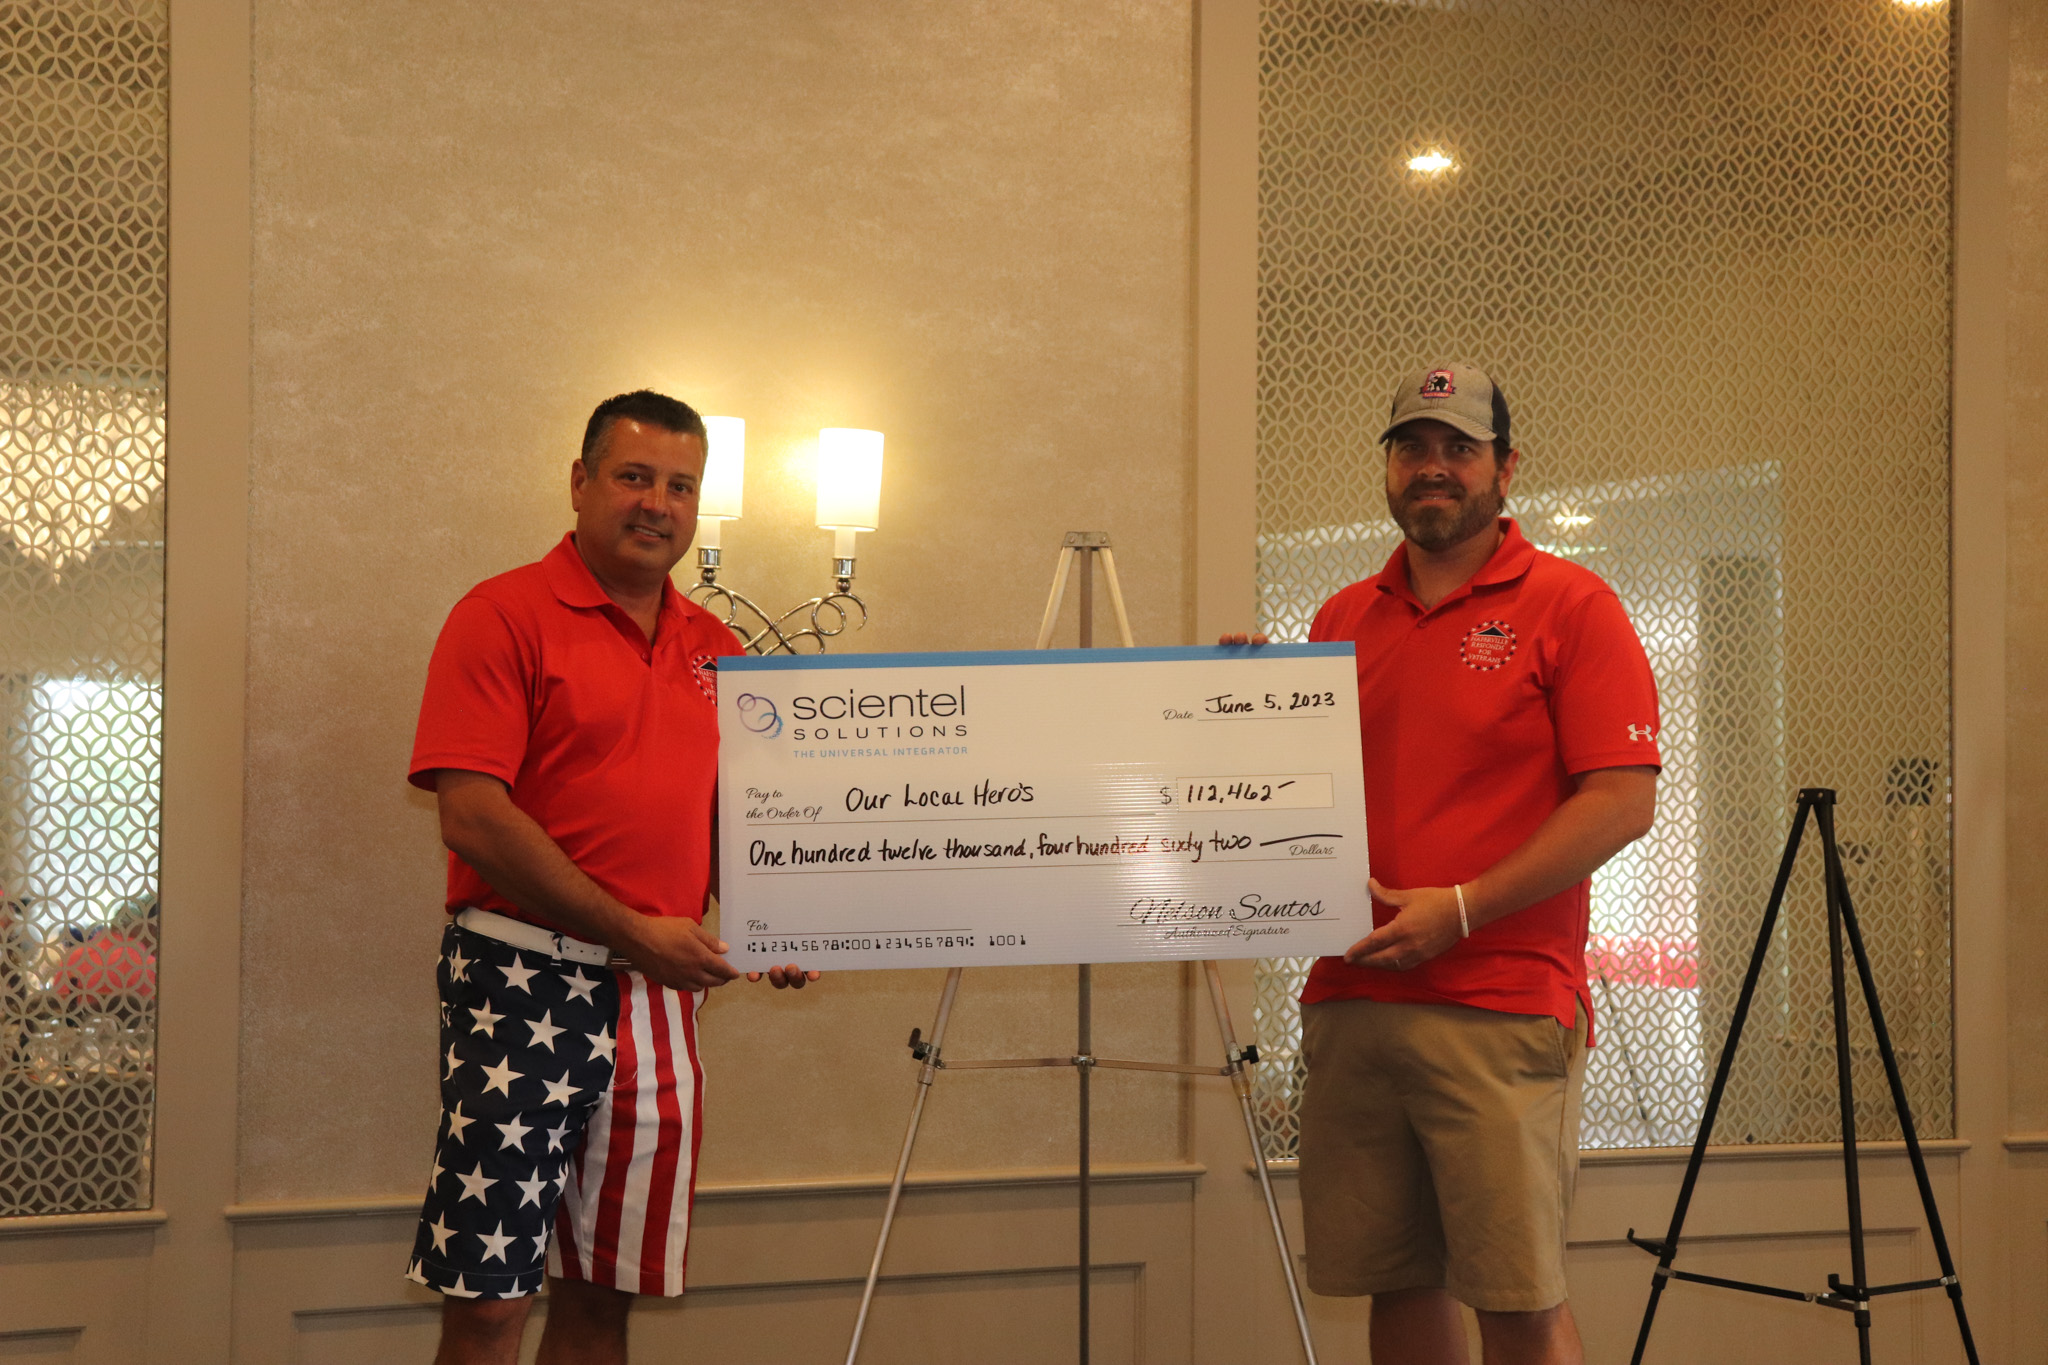 Nelson Santos, CEO of Scientel Solutions holding a donation check to a local veteran organization.